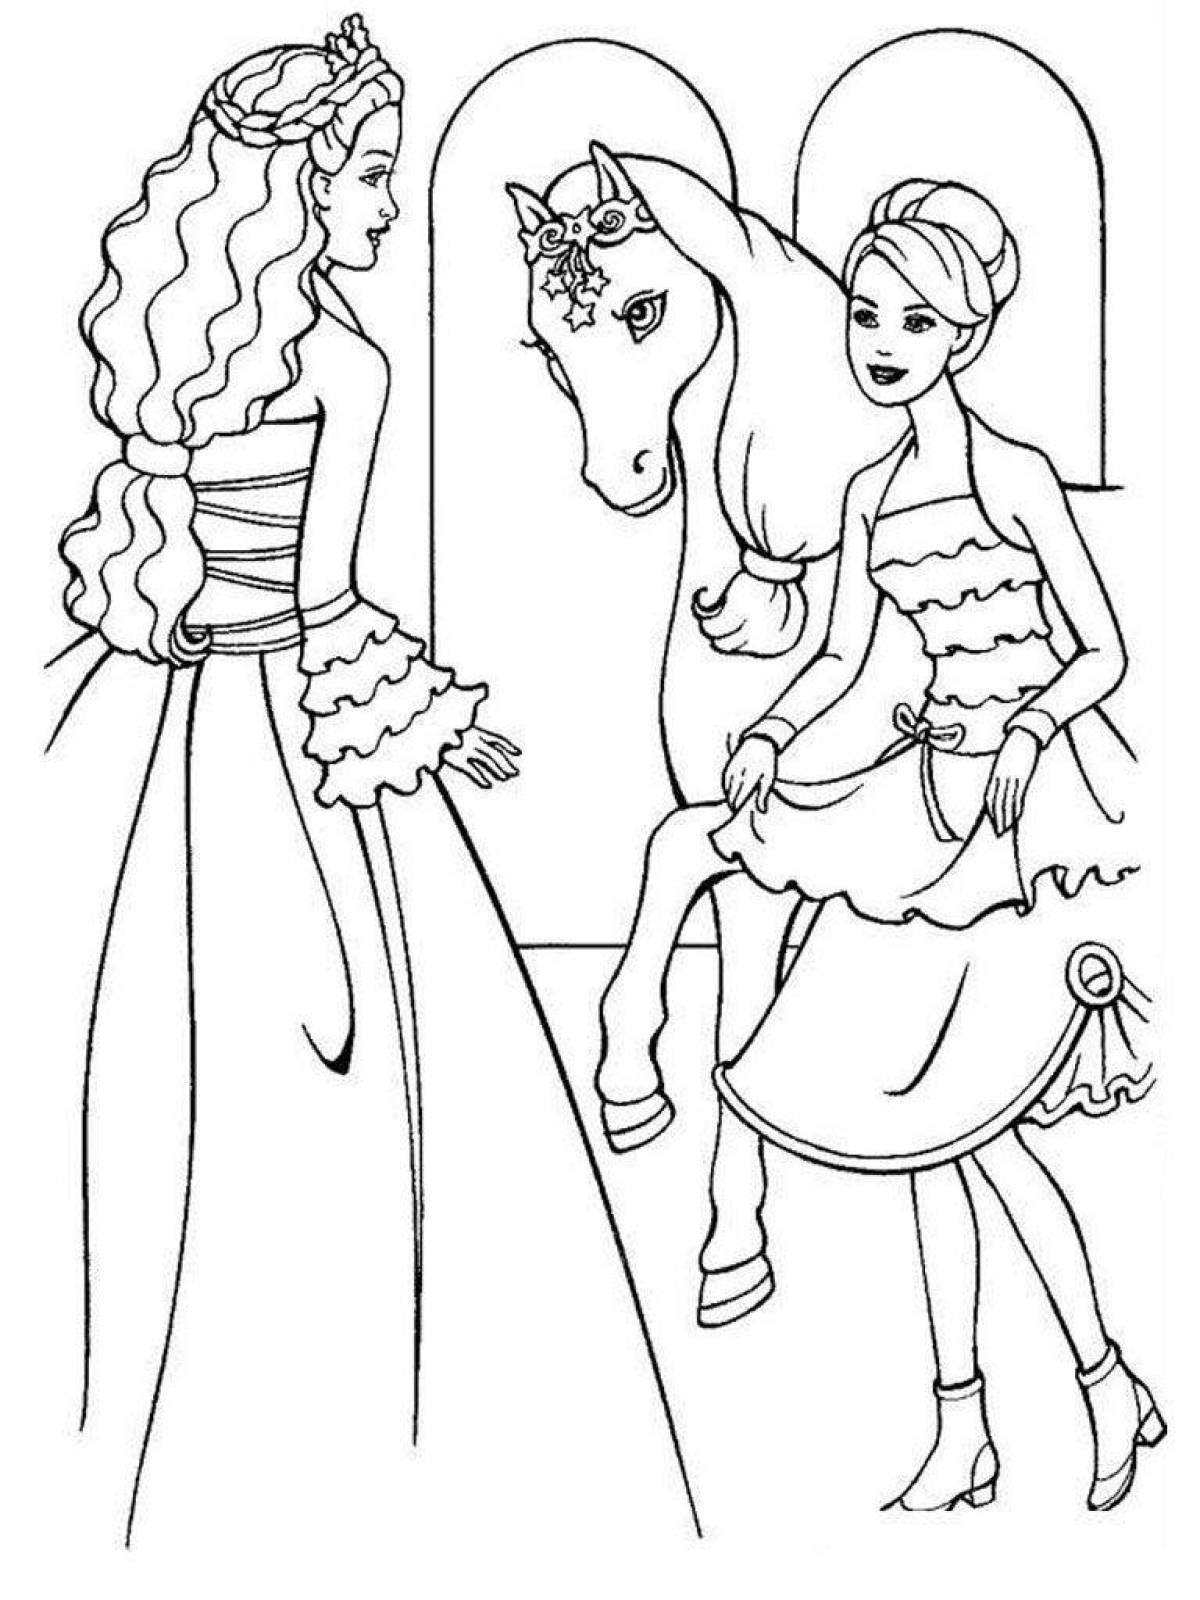 Exquisite barbie coloring book for kids